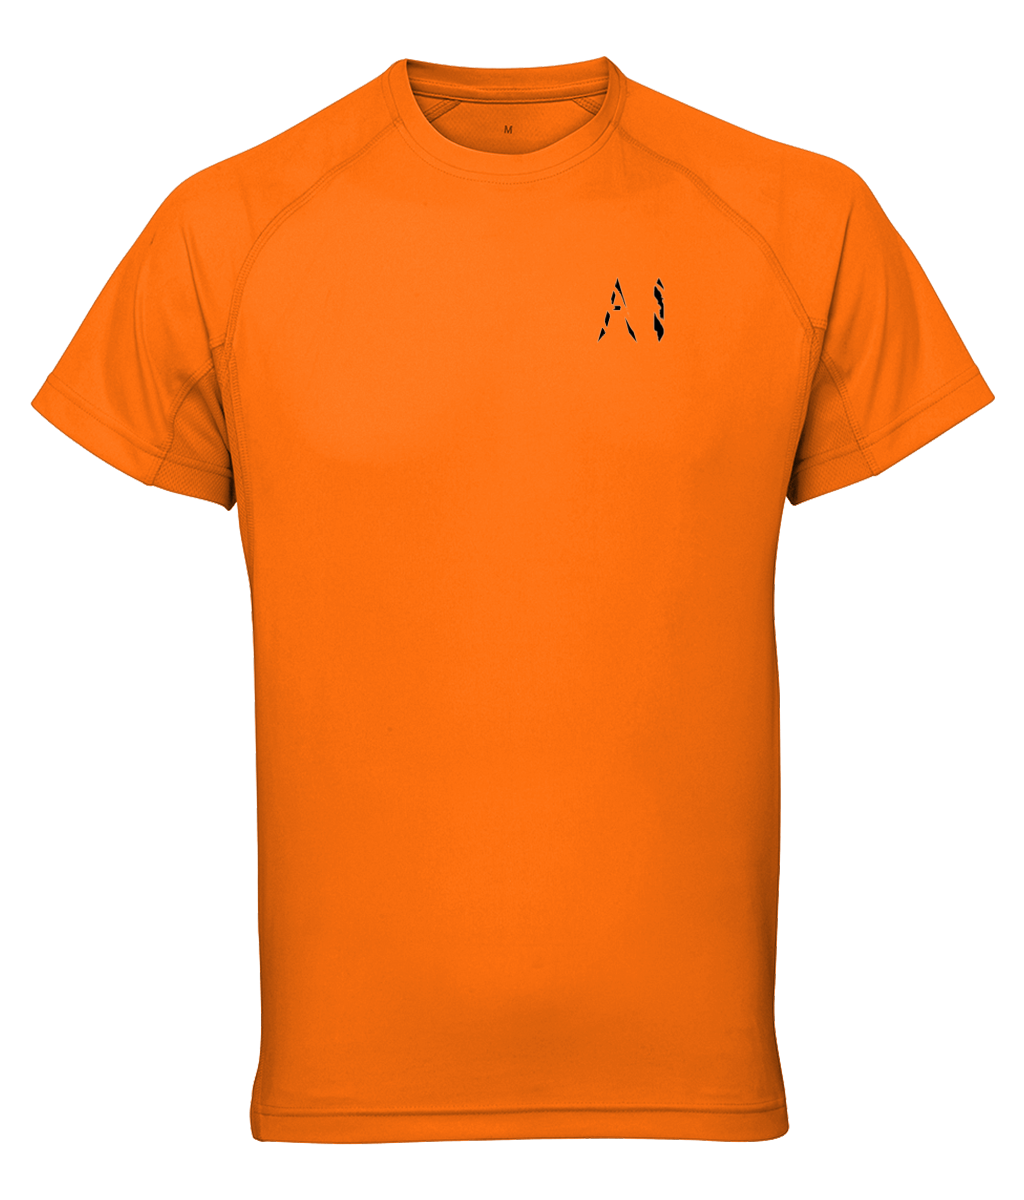 Mens orange Athletic Performance Top with black AI logo on the left chest